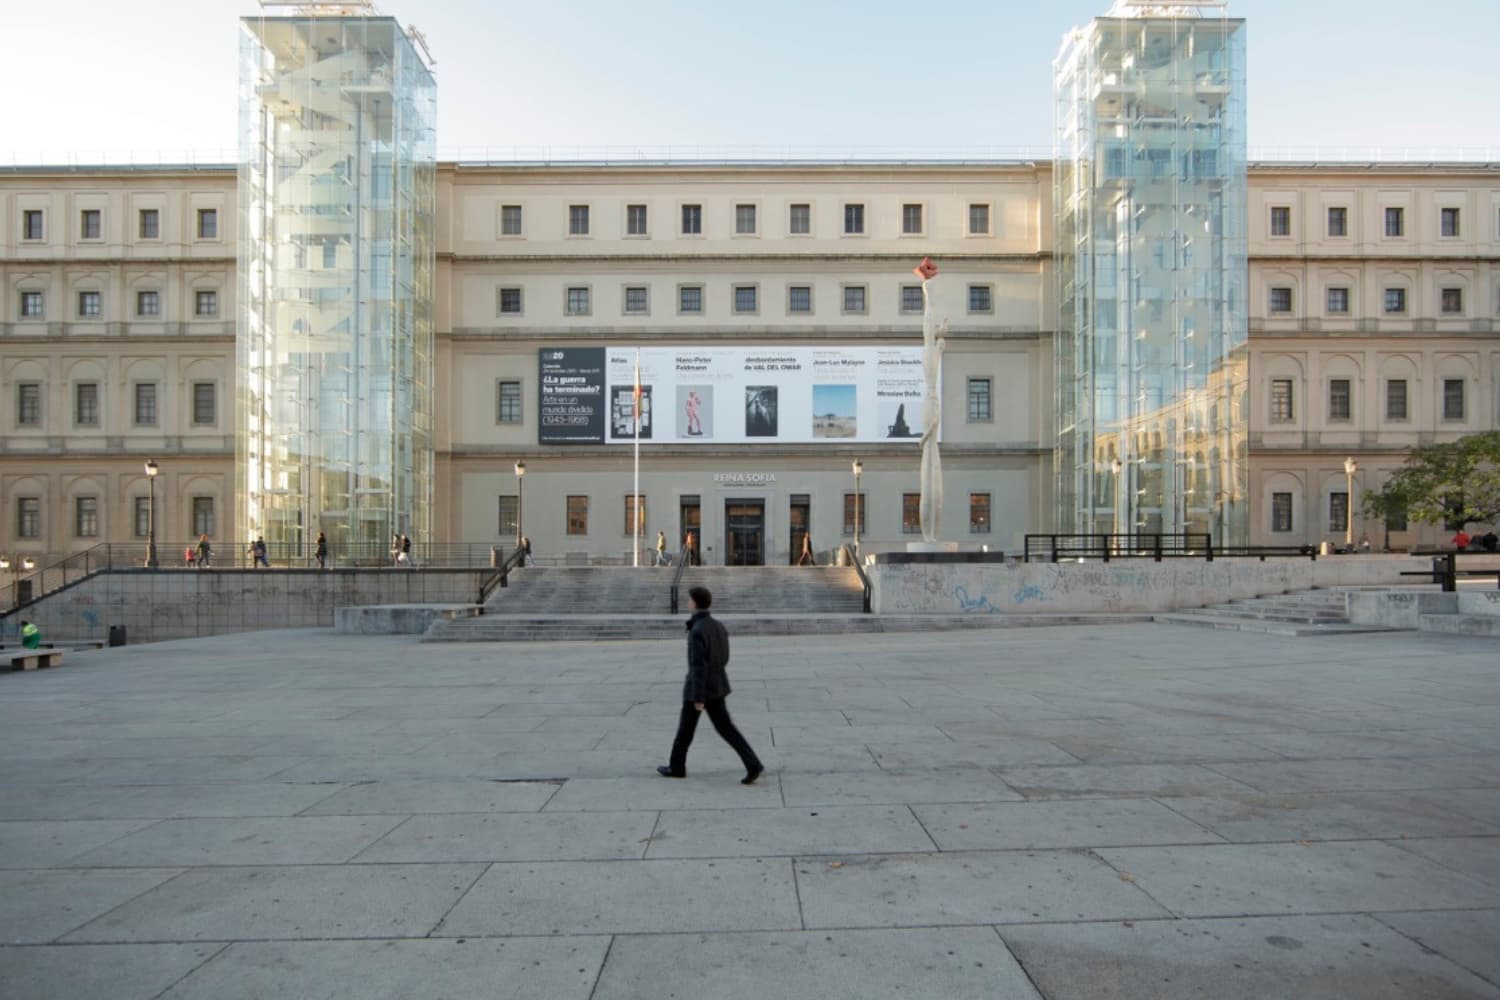 "Partial View", an exhibition by Ibon Aranberri at the Reina Sofia Museum in Madrid